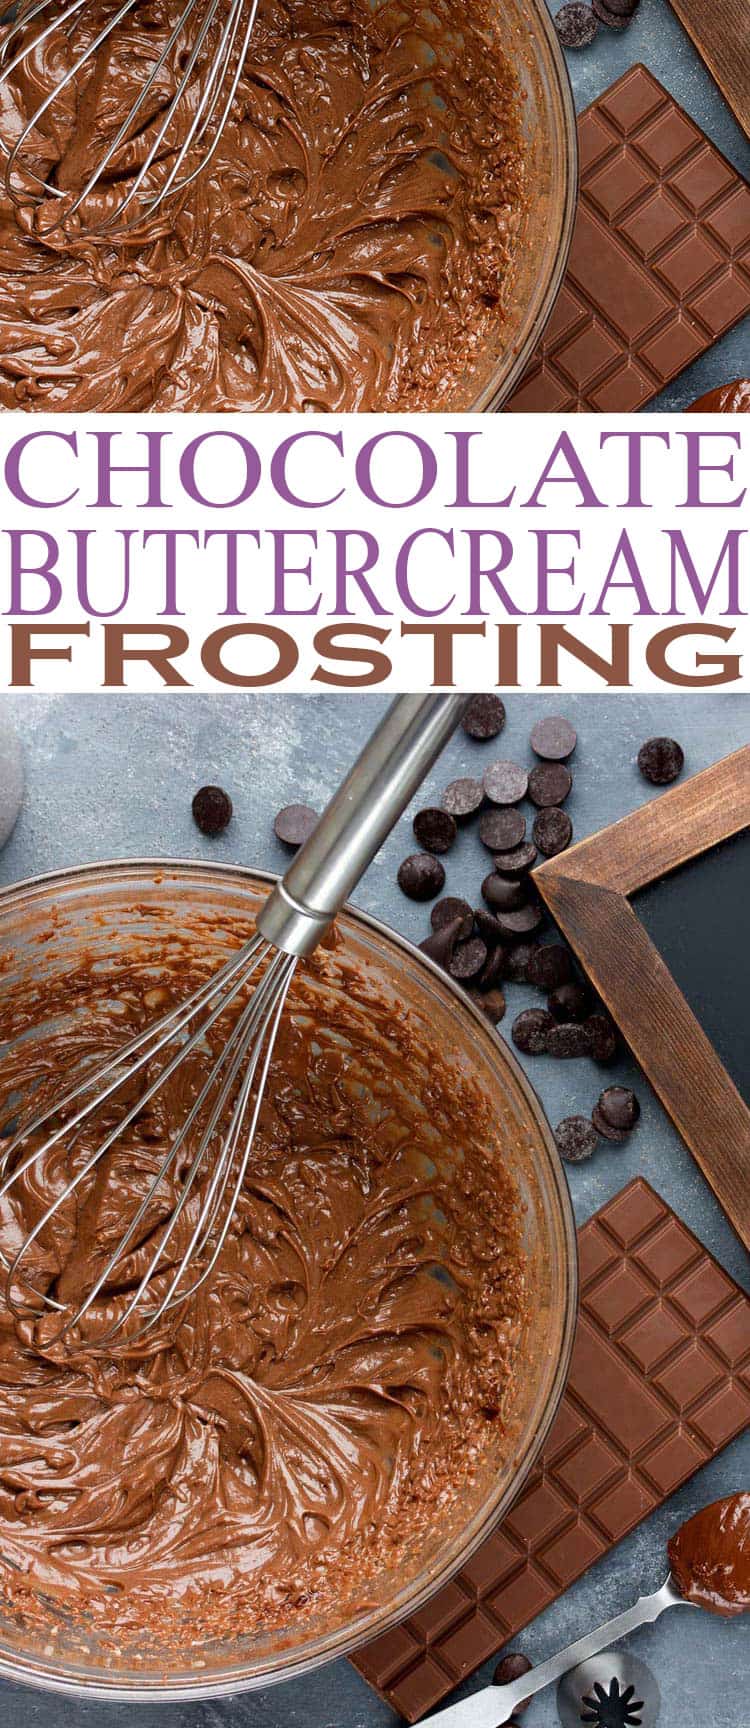 Chocolate Buttercream Frosting recipe is easy to follow and even easier to eat. This creamy chocolatey frosting is delicious and the best chocolate frostingf for cupcakes and cakes.